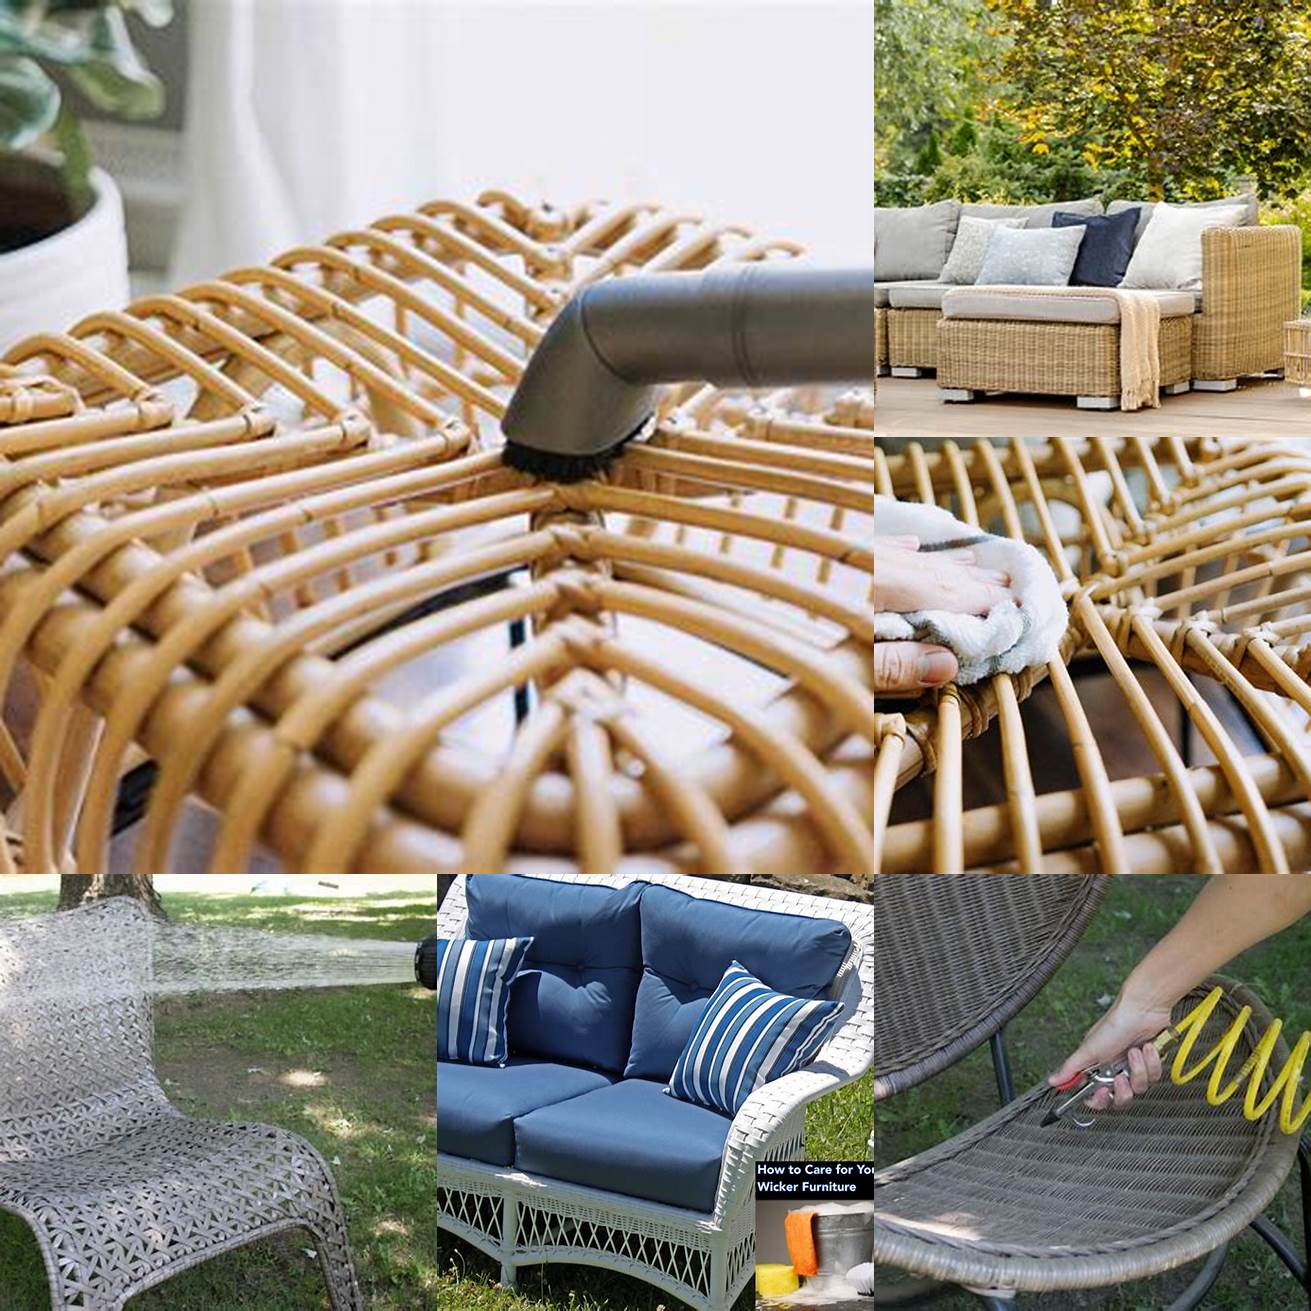 Keep your wicker furniture clean and dry